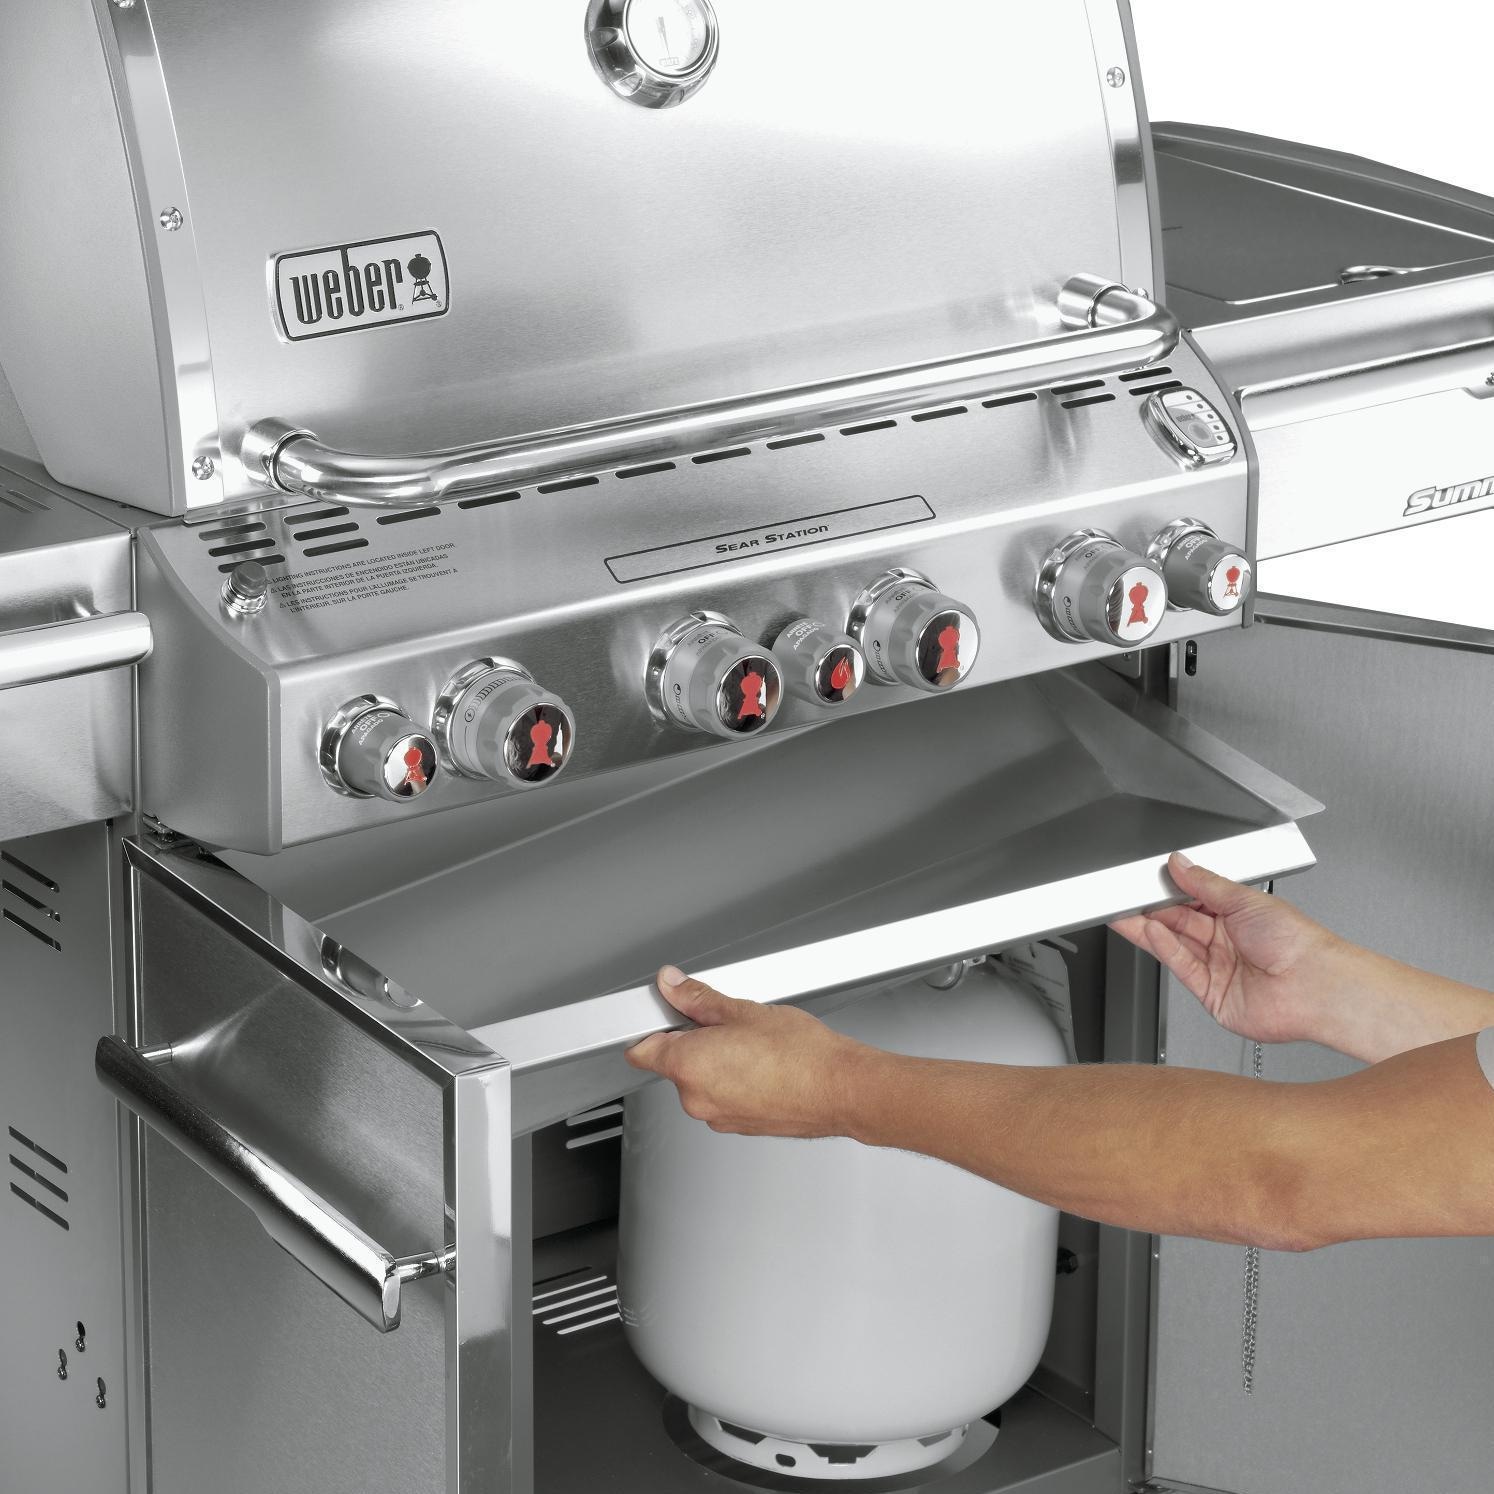 Summit S-470 Propane Stainless Steel - image 4 of 6